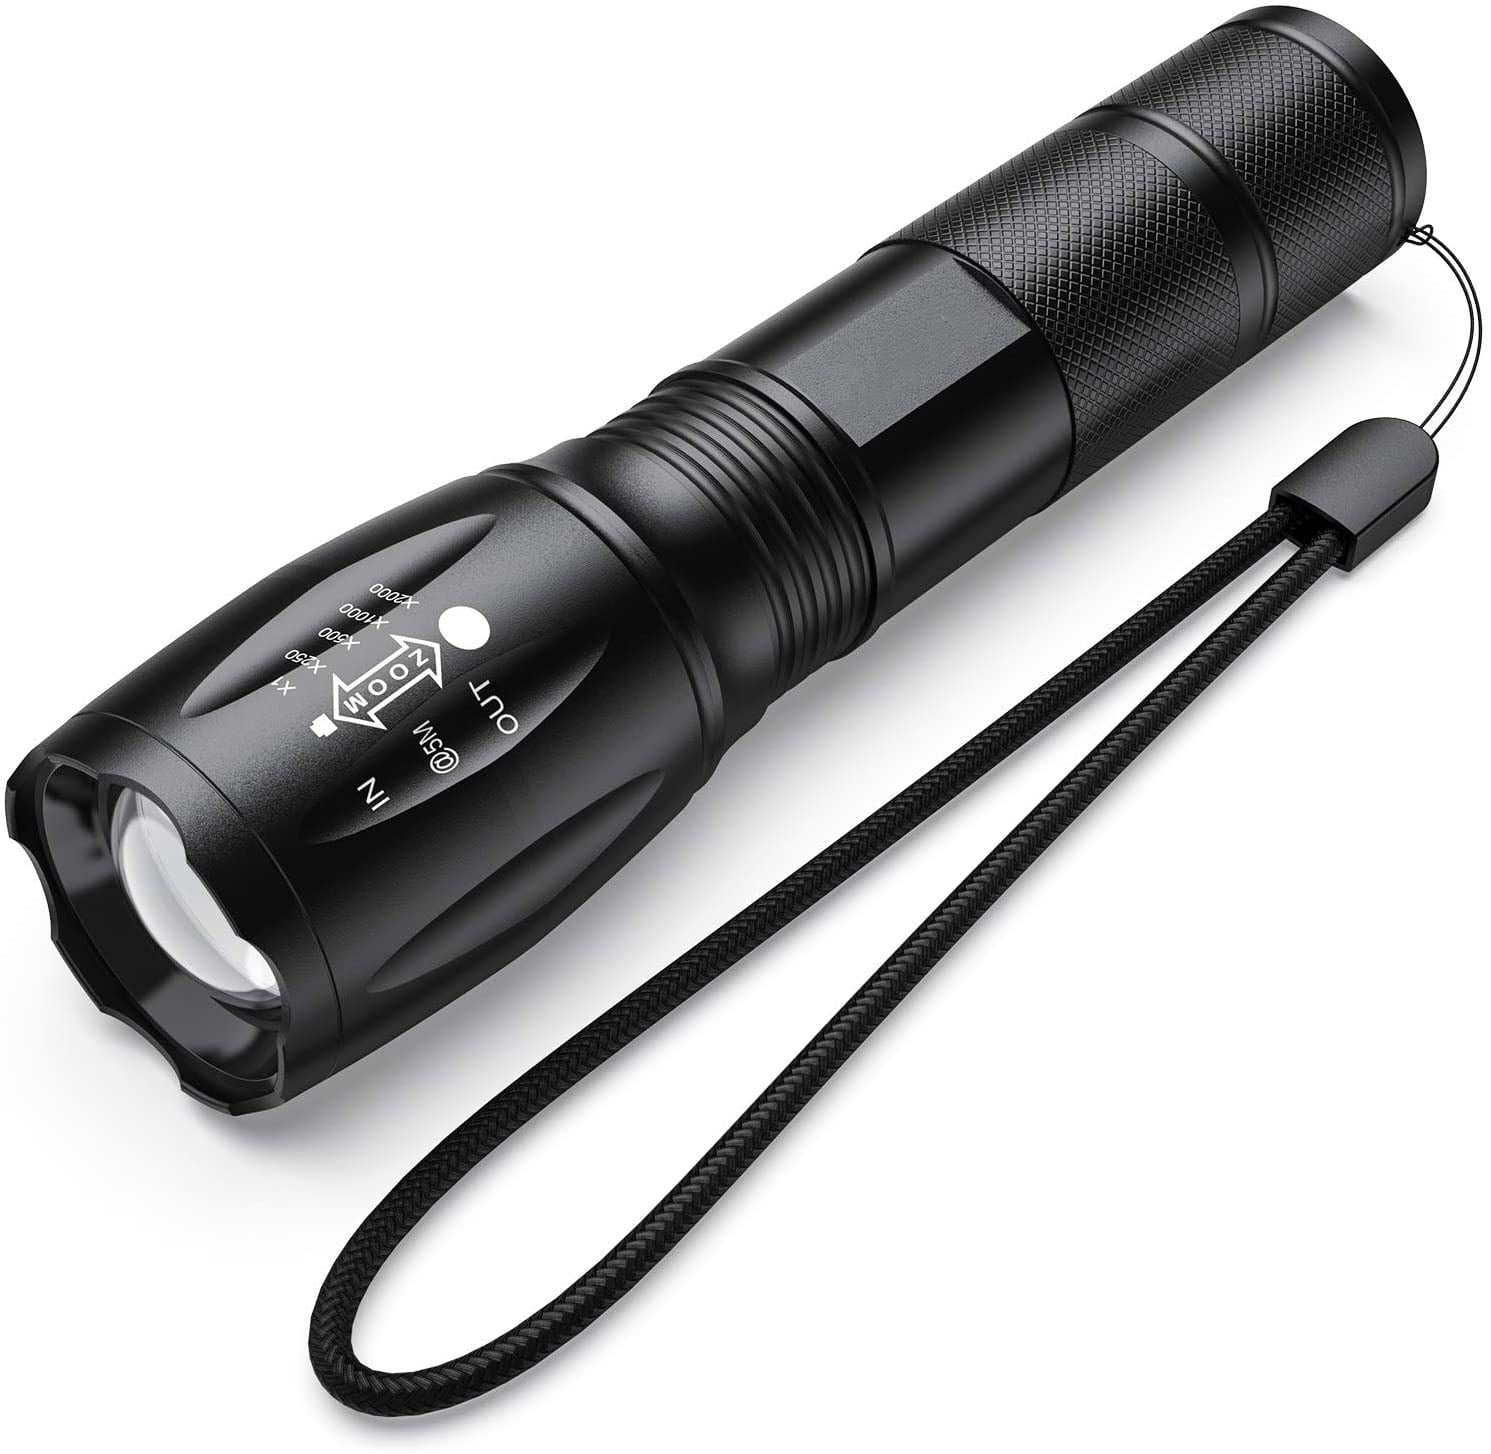 Menagerry harvest journalist Flashlights - Super Bright 2000 Lumen XML T6 LED Flashlights Portable  Outdoor Water Resistant Torch Light Zoomable Flashlight with 5 Light Modes  - Walmart.com